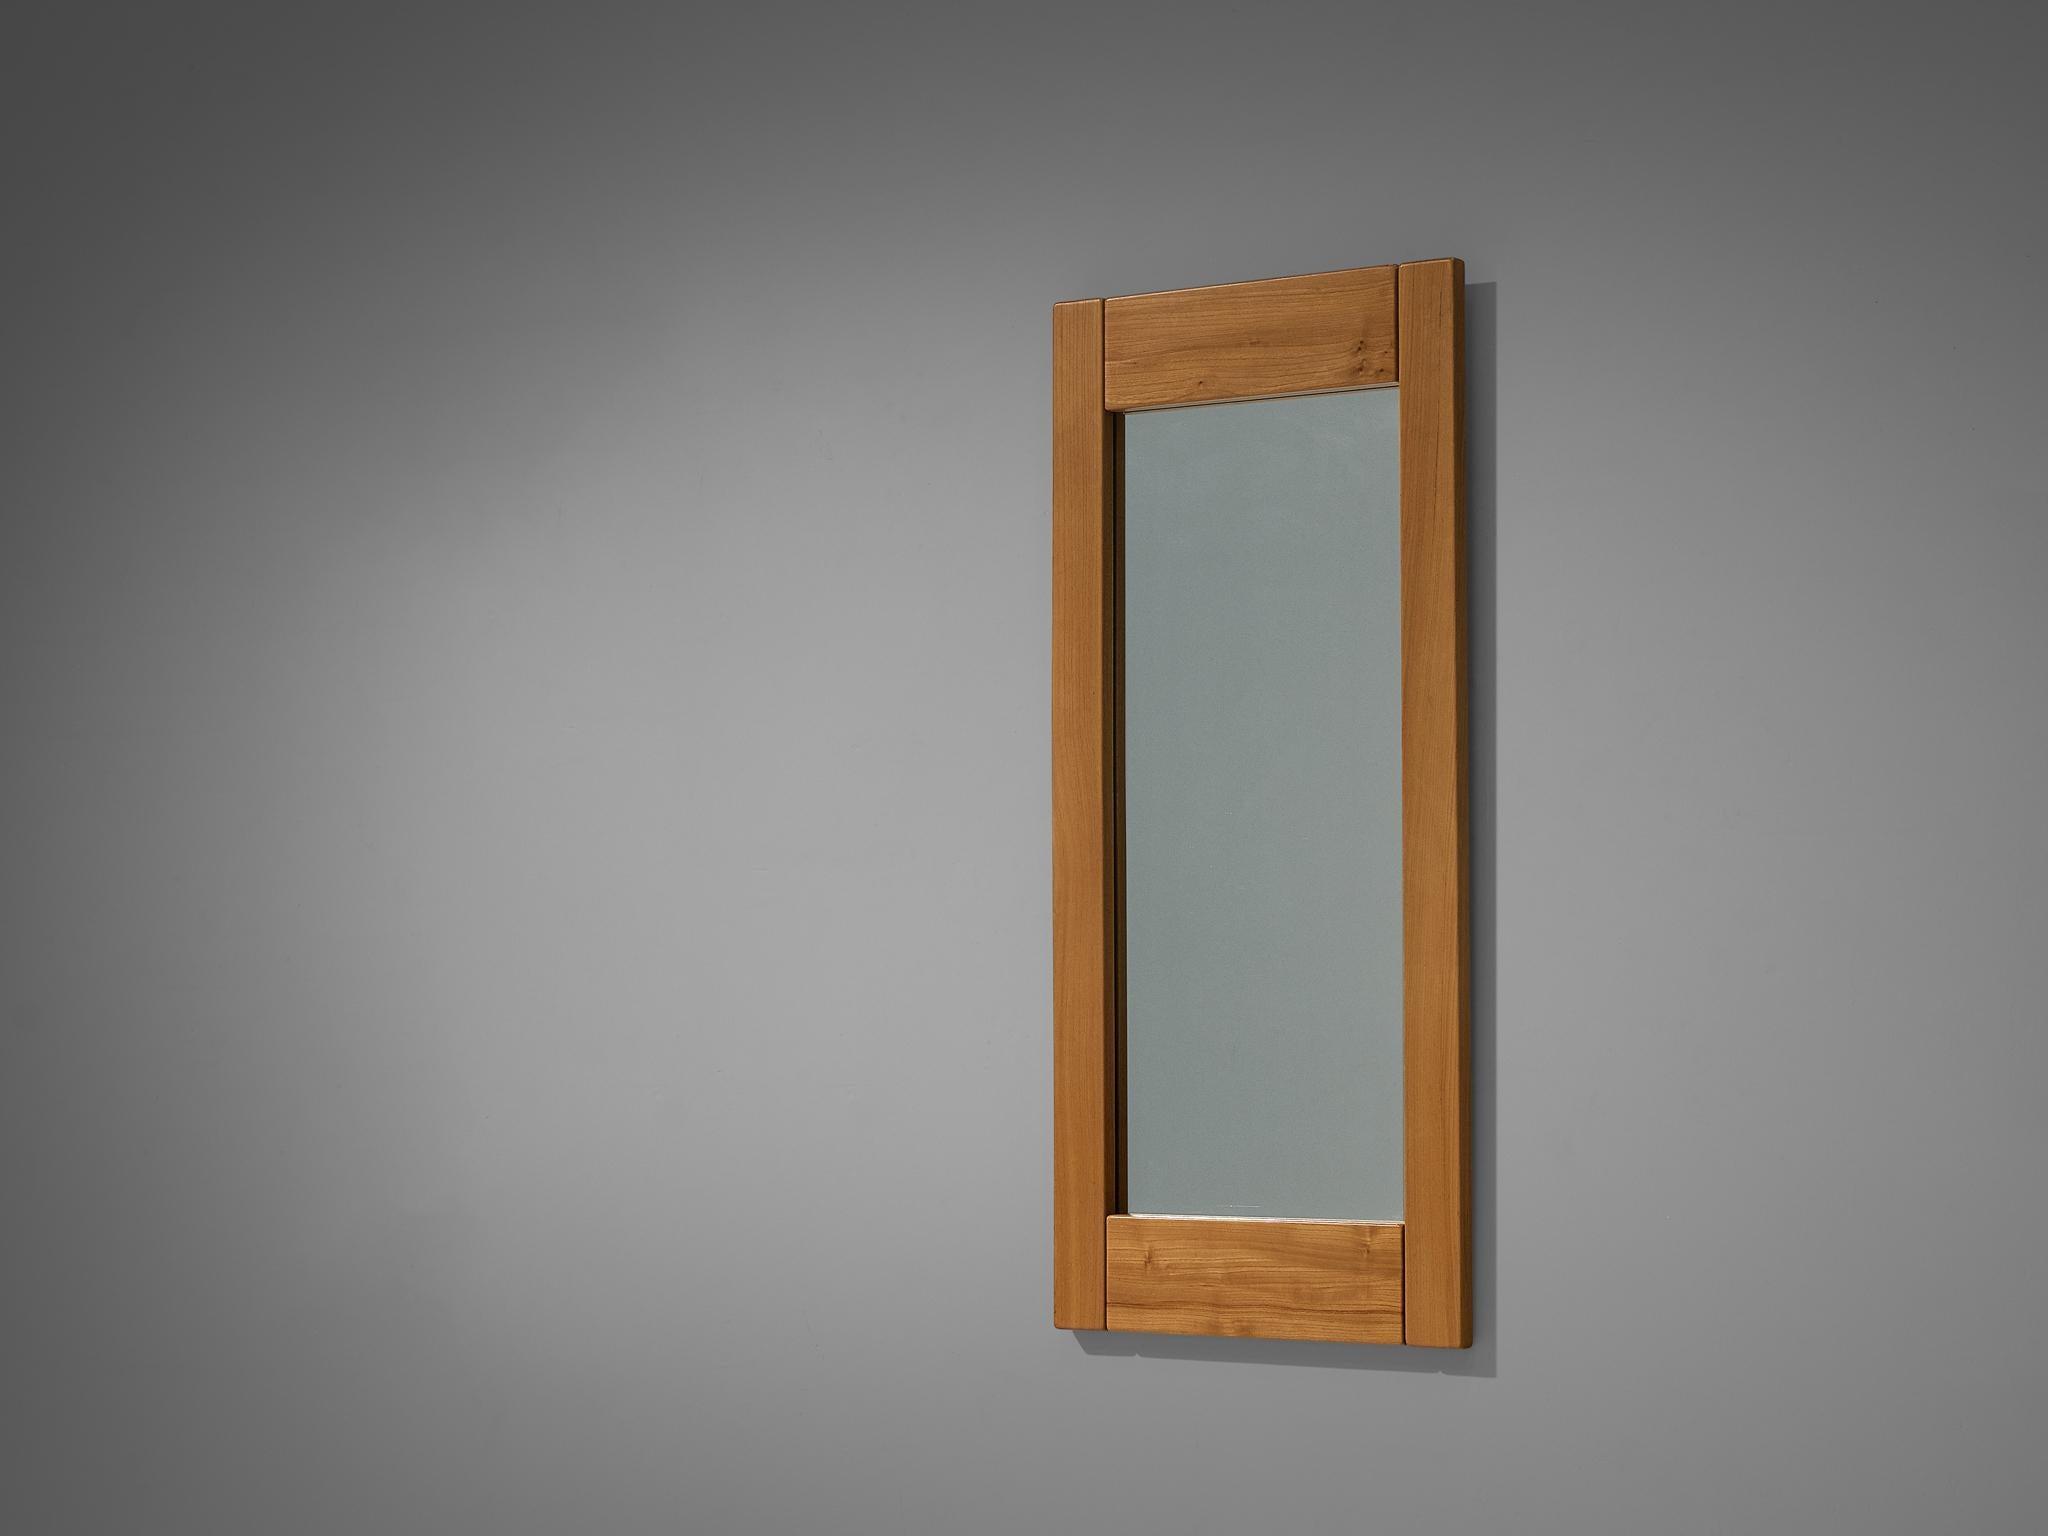 Maison Regain, wall mirrors, elm, glass, France, 1970s.

The French manufacturer Maison Regain is known for their high-quality furniture pieces in elm wood. This mirror is no exception to their reputation. The rectangular glass is framed by the